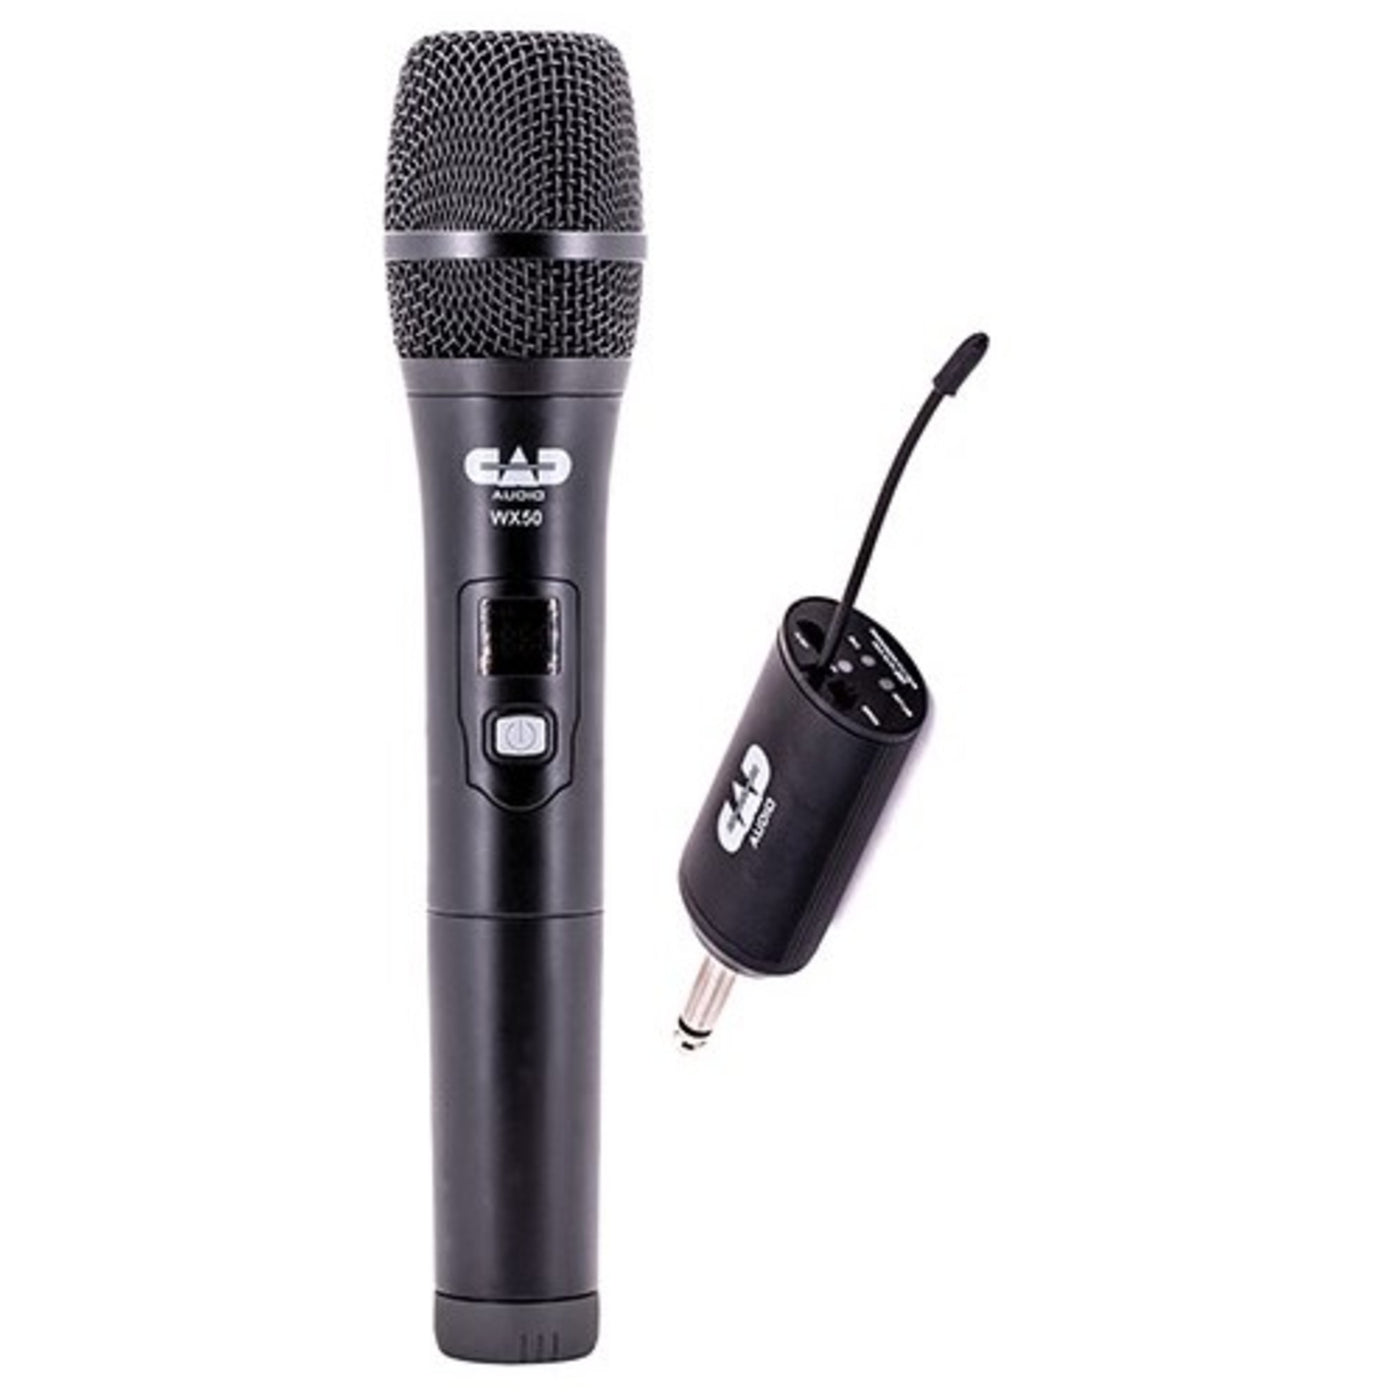 CAD Audio WX50 Digital Frequency Agile Handheld Wireless Microphone System (WX50)